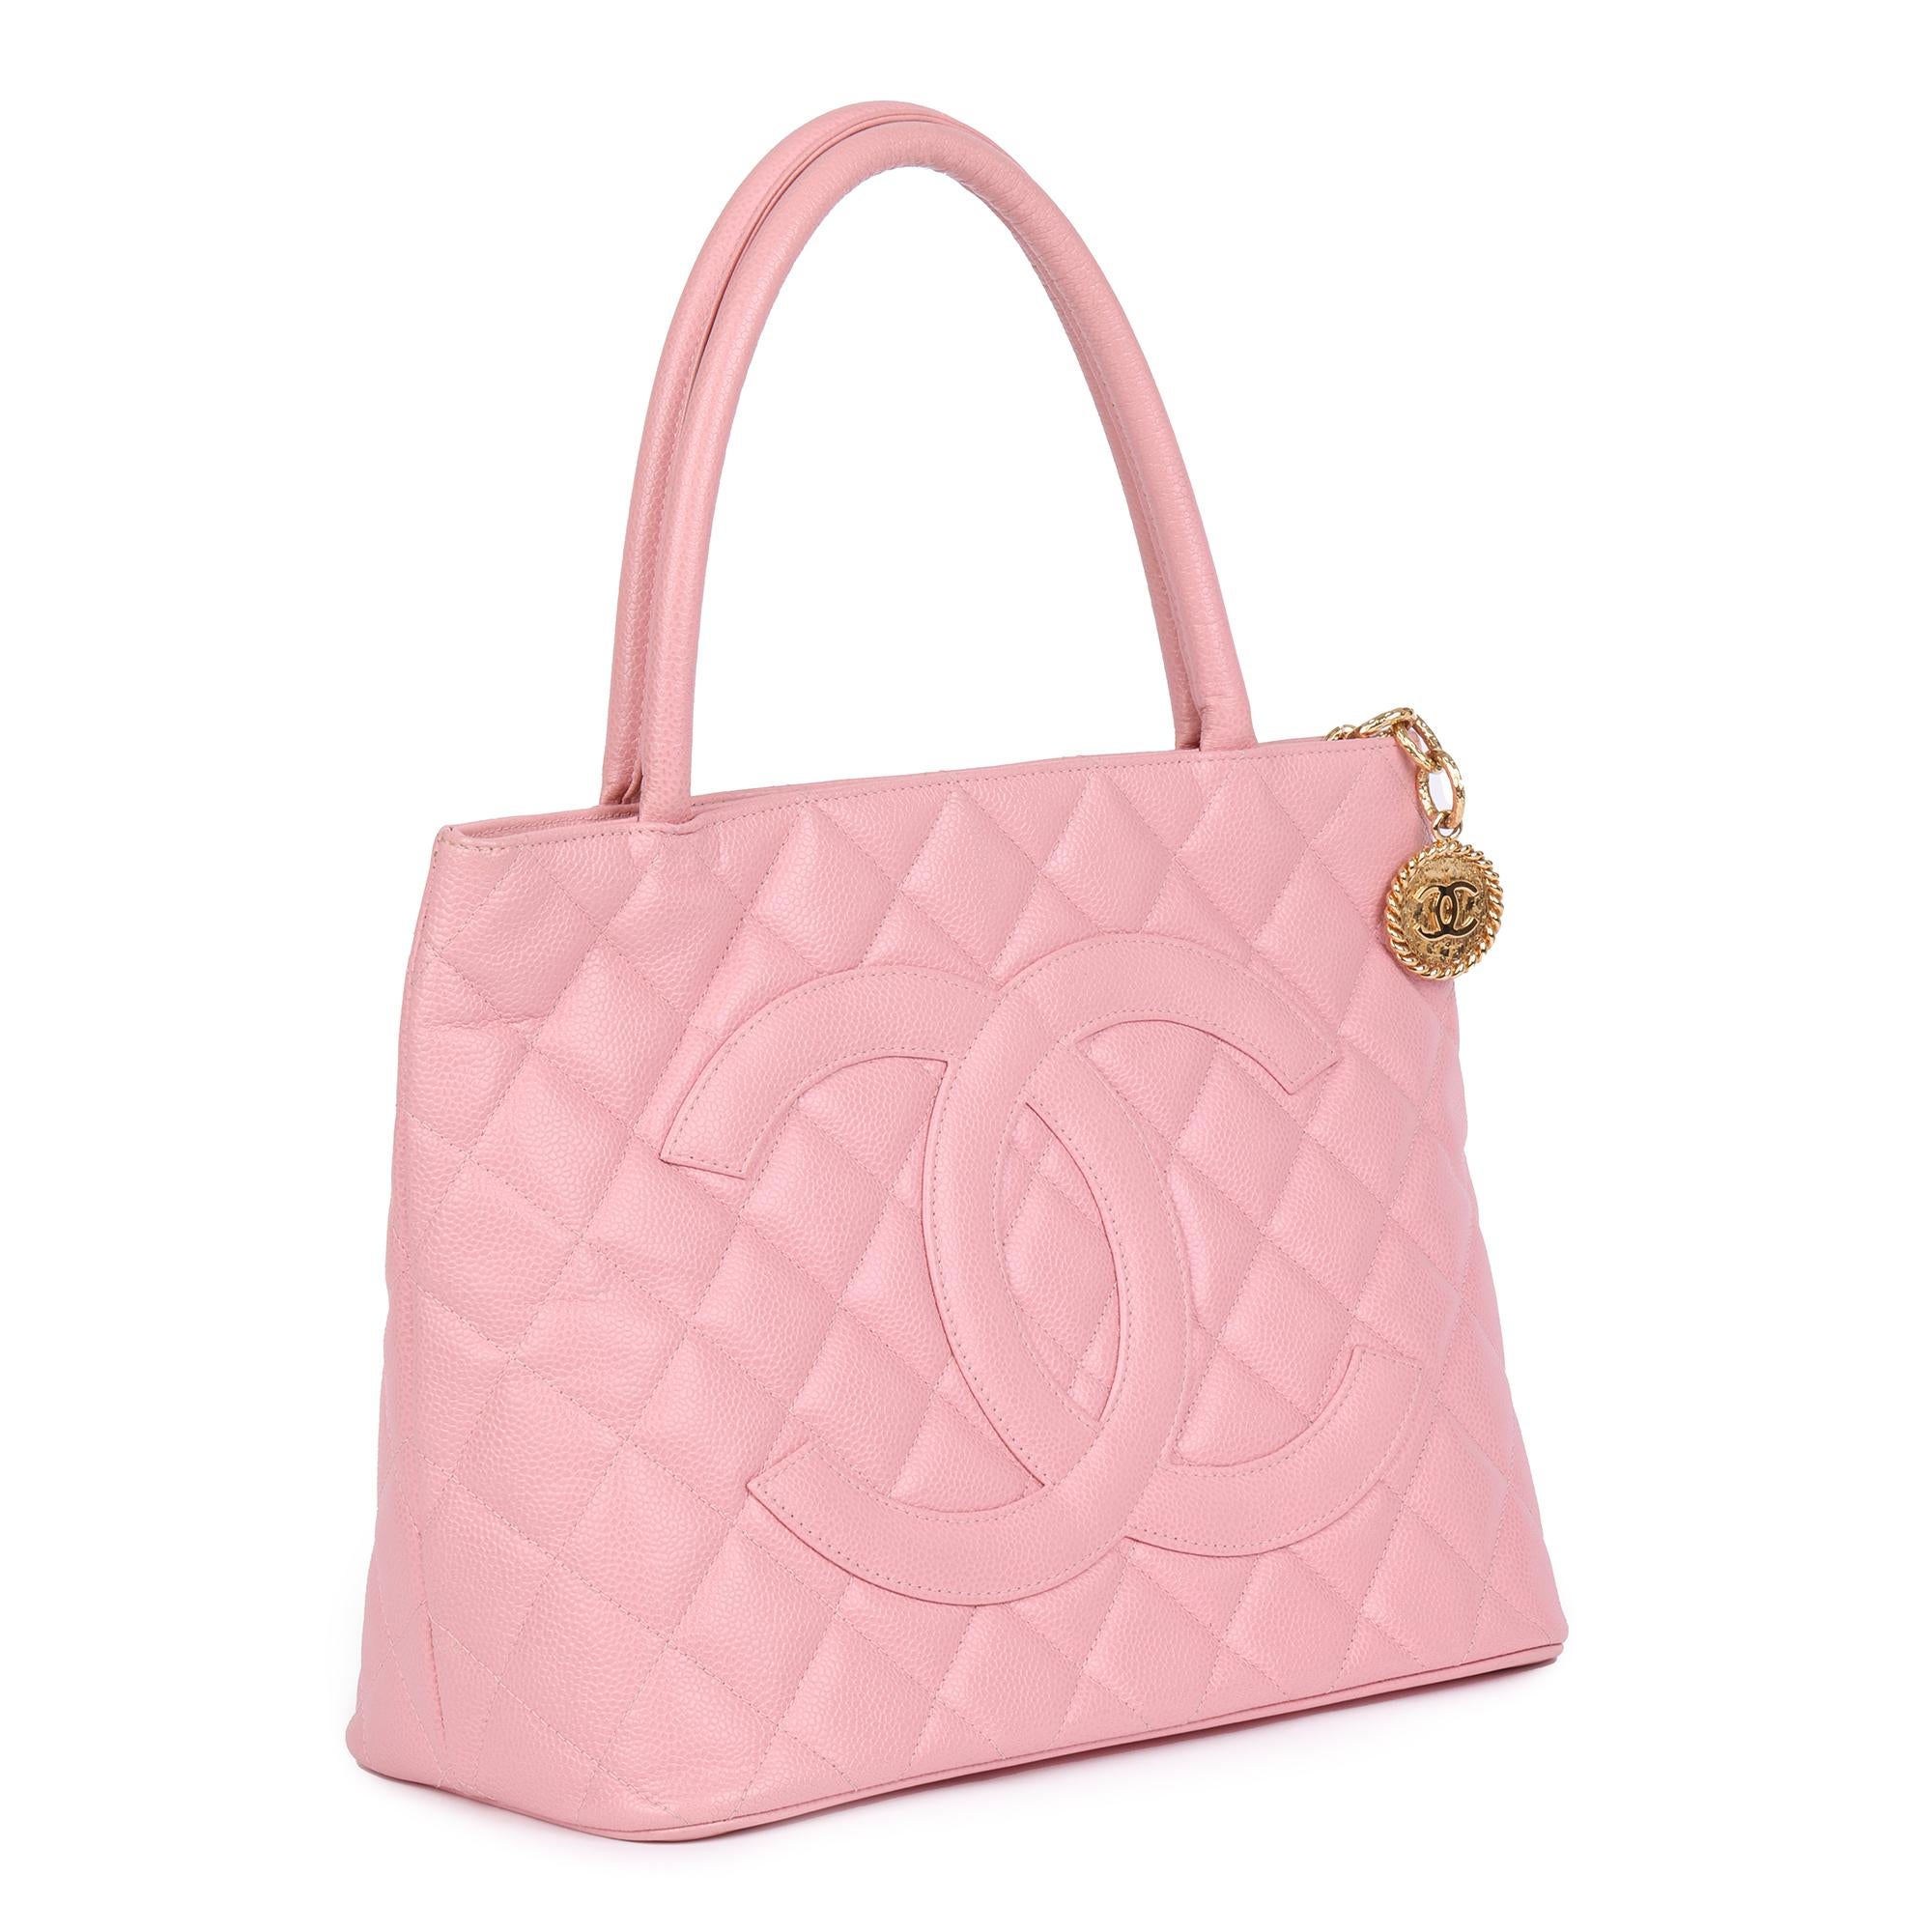 CHANEL
Pink Quilted Caviar Leather Medallion Tote

Xupes Reference: HB4108
Serial Number: 9059374
Age (Circa): 2005
Accompanied By: Chanel Dust Bag, Care Booklet, Authenticity Card
Authenticity Details: Authenticity Card, Serial Sticker (Made in